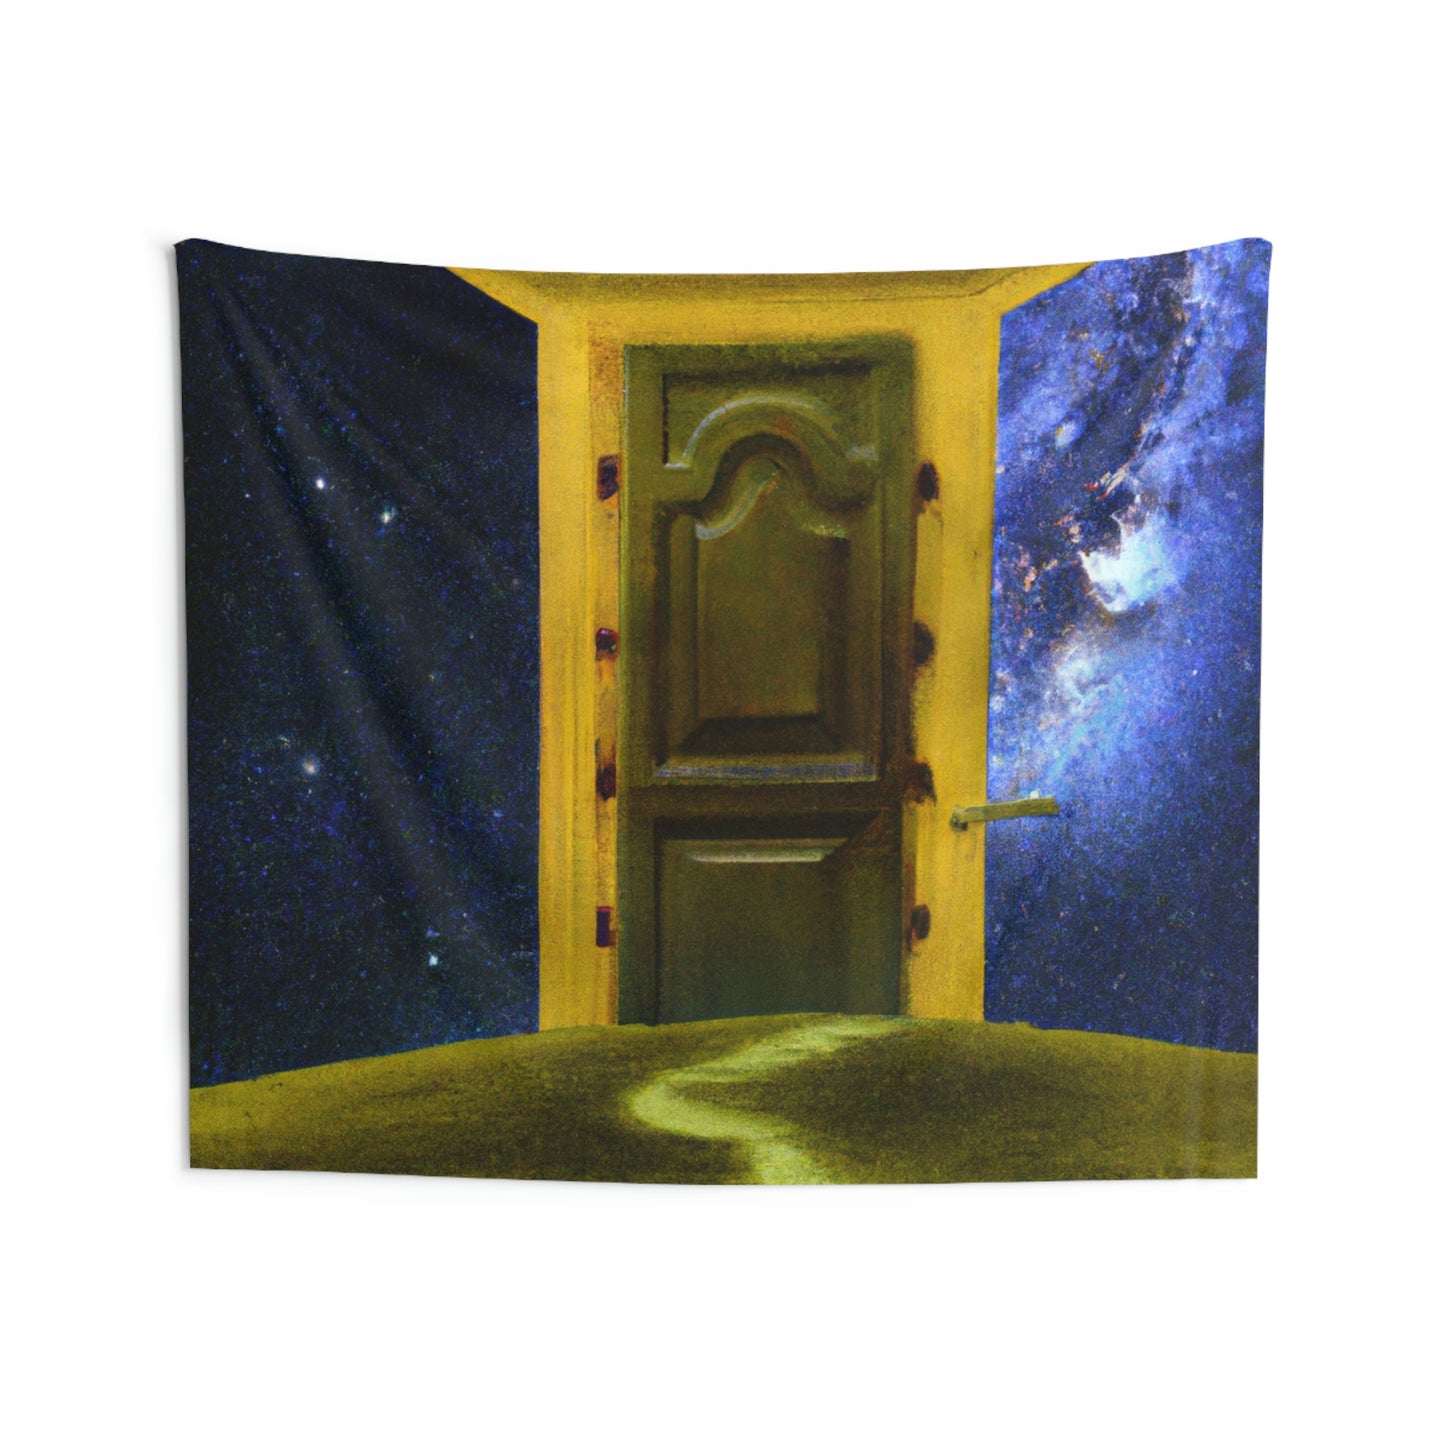 The Heavenly Threshold - The Alien Wall Tapestries